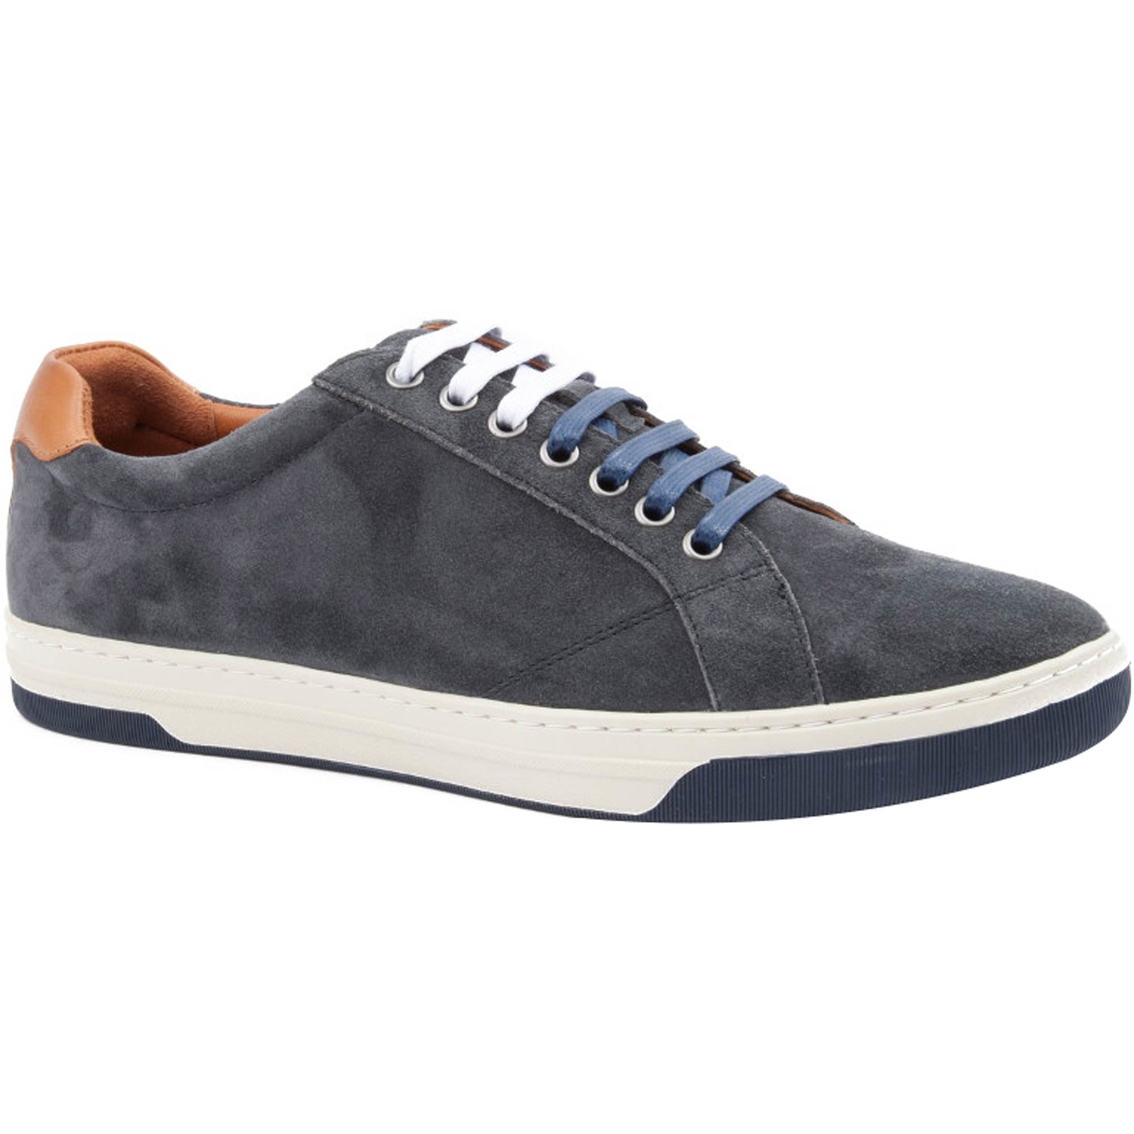 Johnston & Murphy Men's Fenton Lace To Toe Athletic Sneakers | Casuals ...